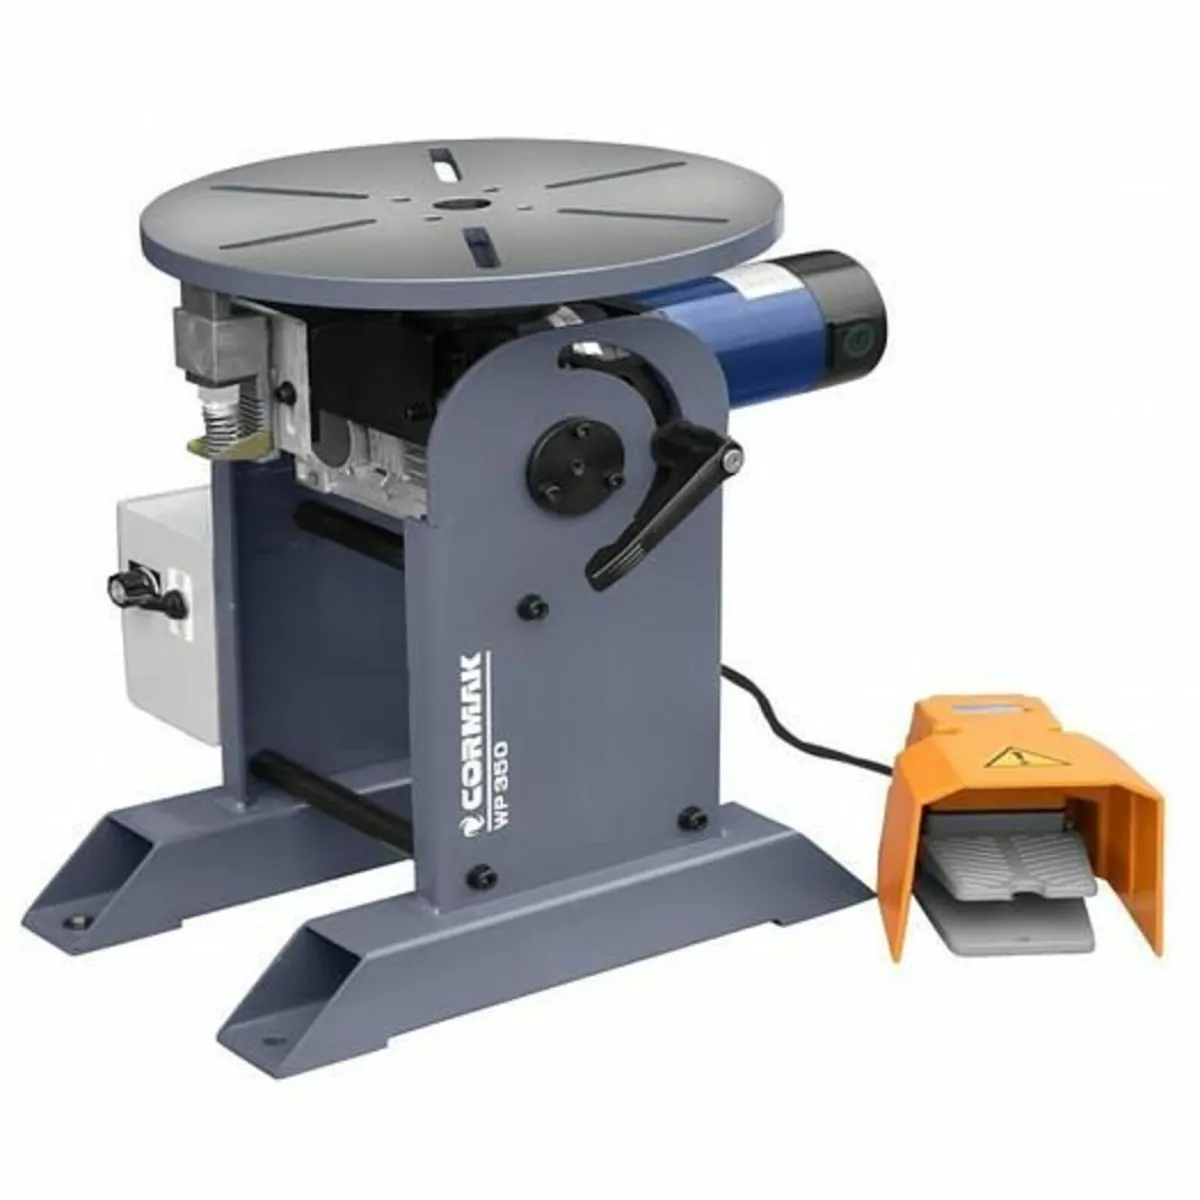 Cormak WP350 Rotary Welding Positioner Table - Image 1